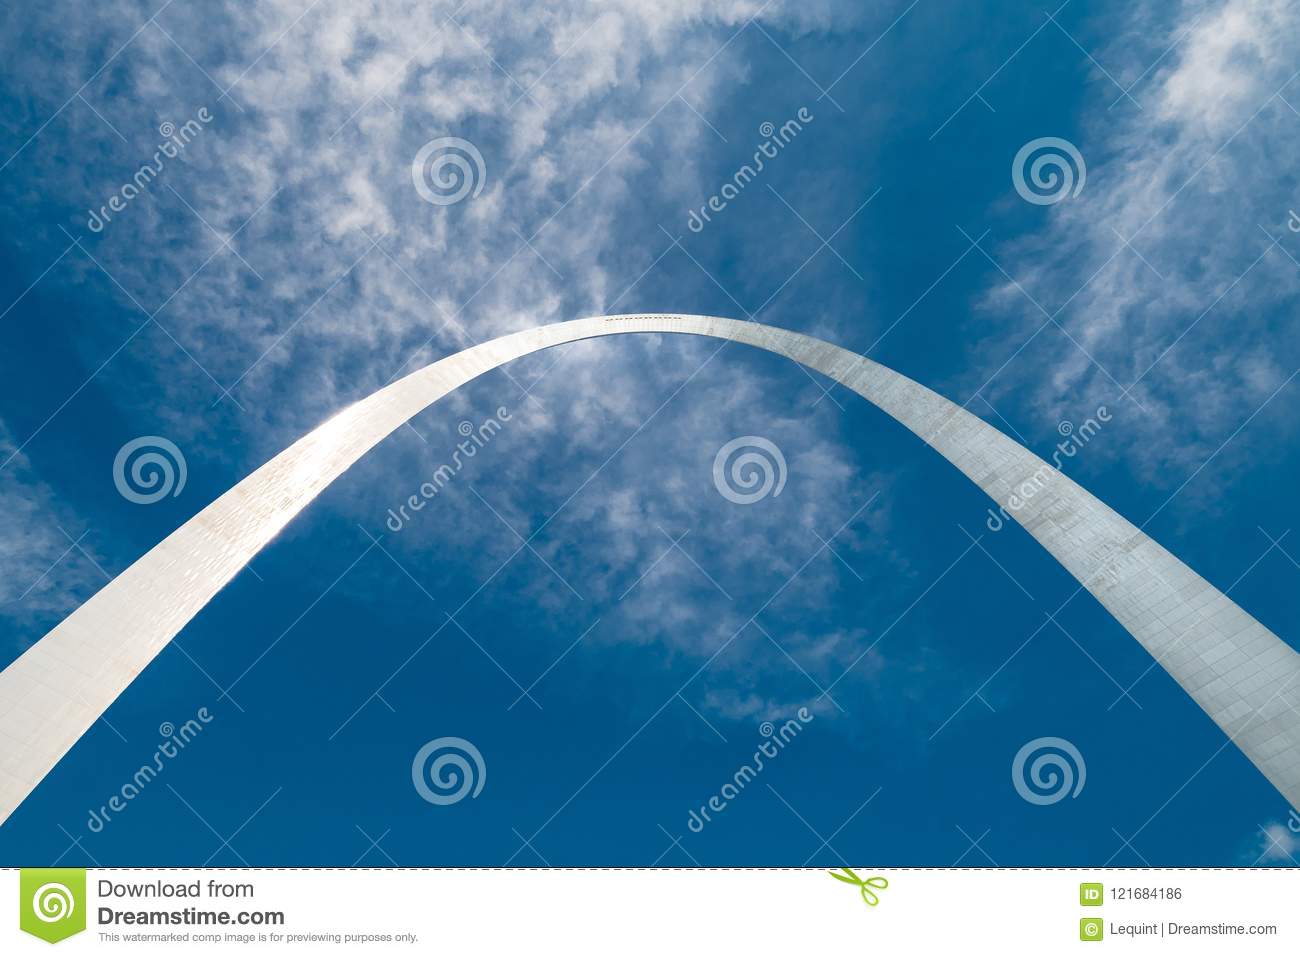 what does the gateway arch in st louis missouri symbolize and when was the gateway arch built